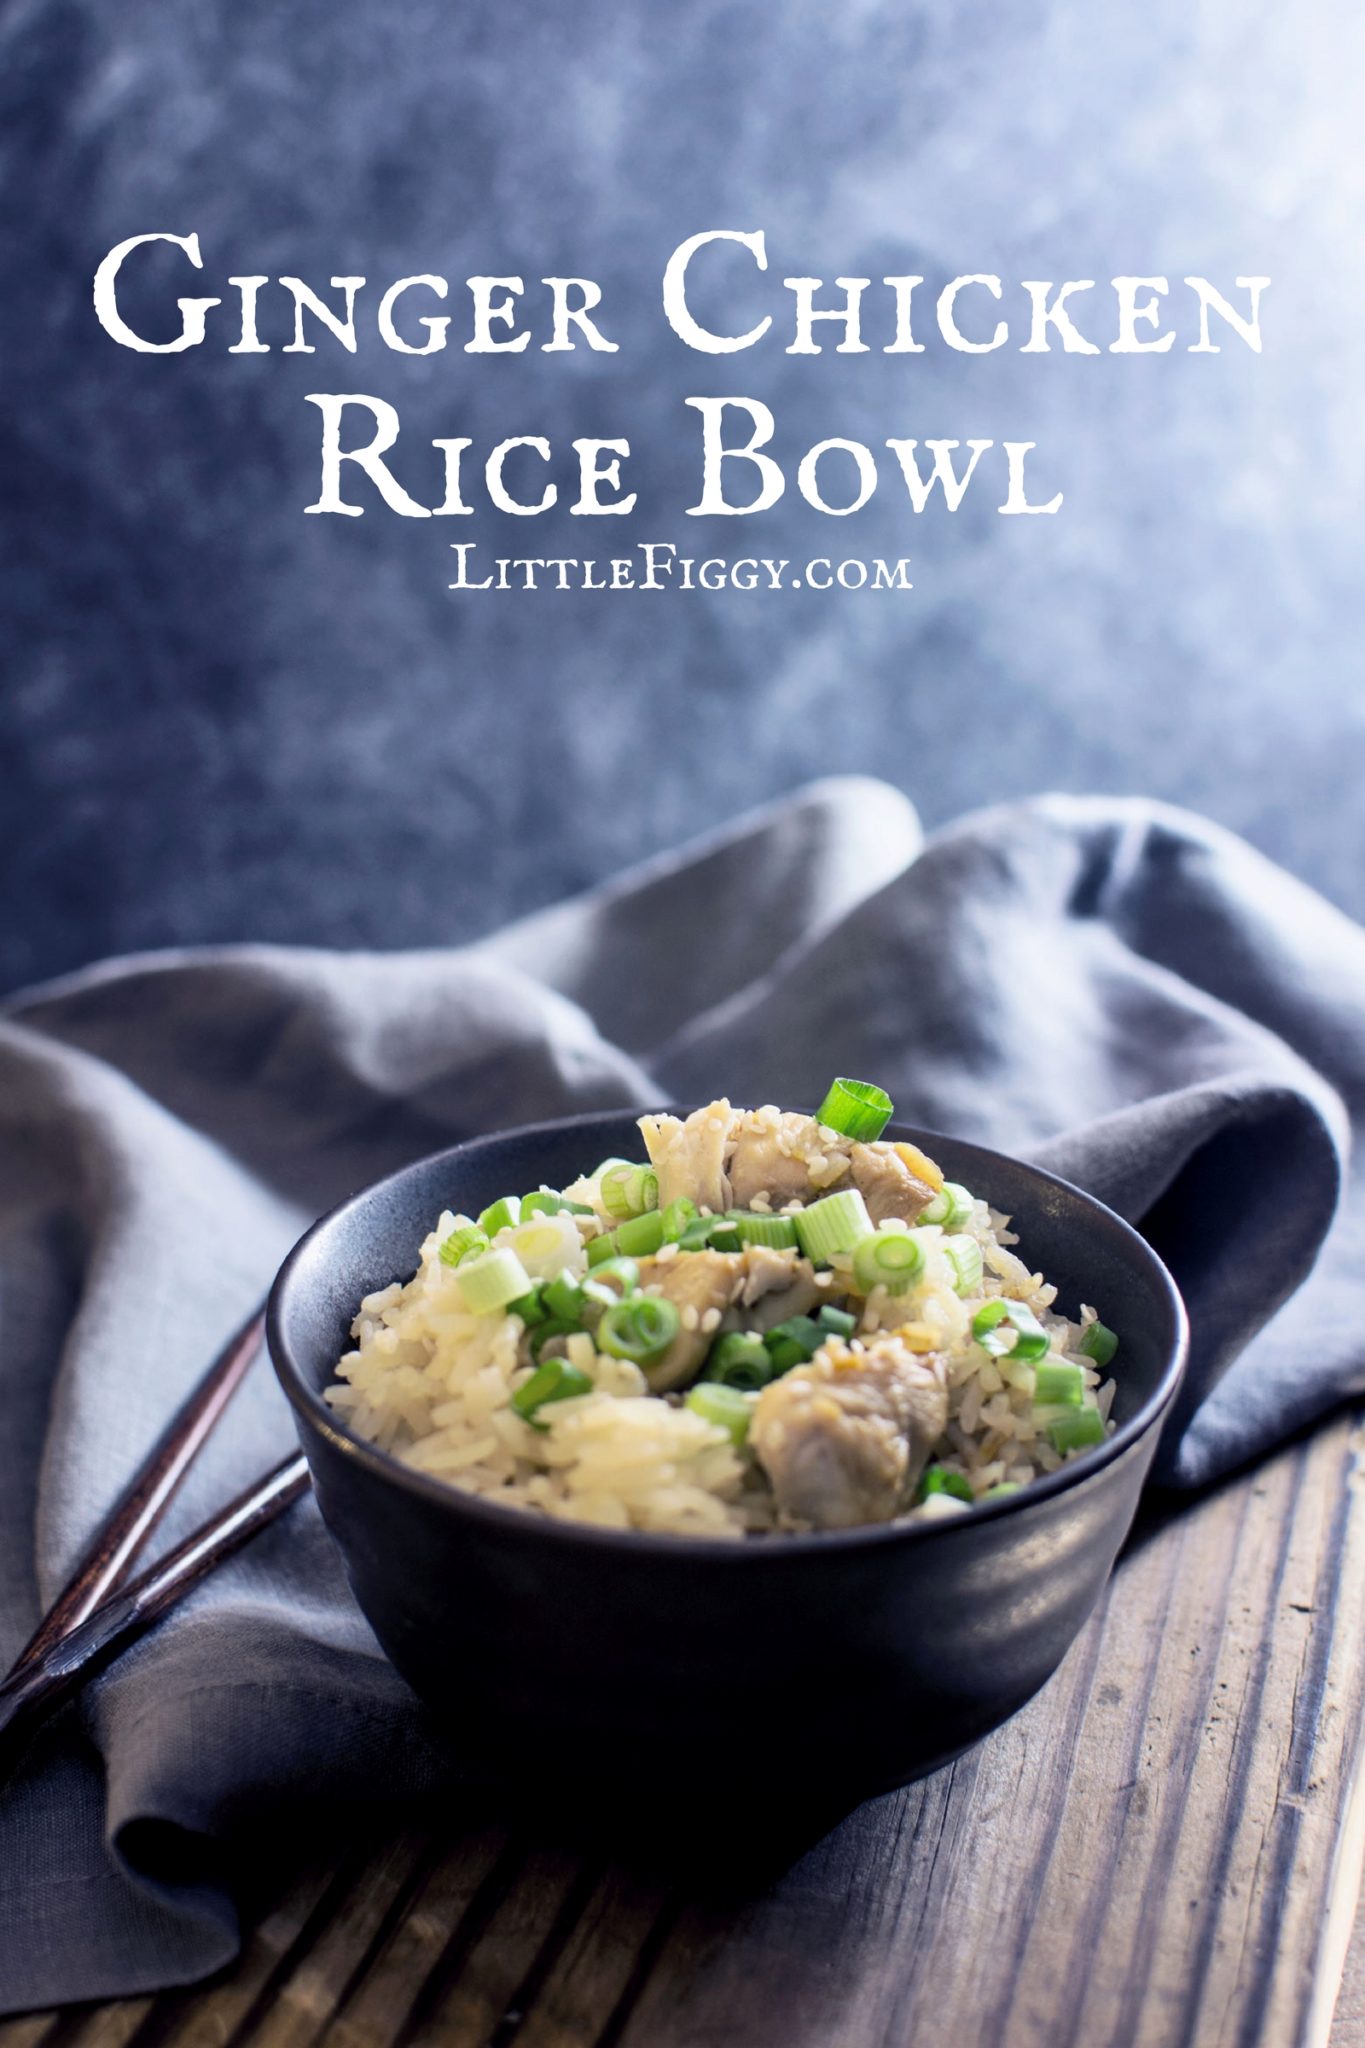 An easy to make, cozy bowl of Ginger Chicken Rice is great for a simple weeknight dinner or anytime. Recipe @LittleFiggyFood